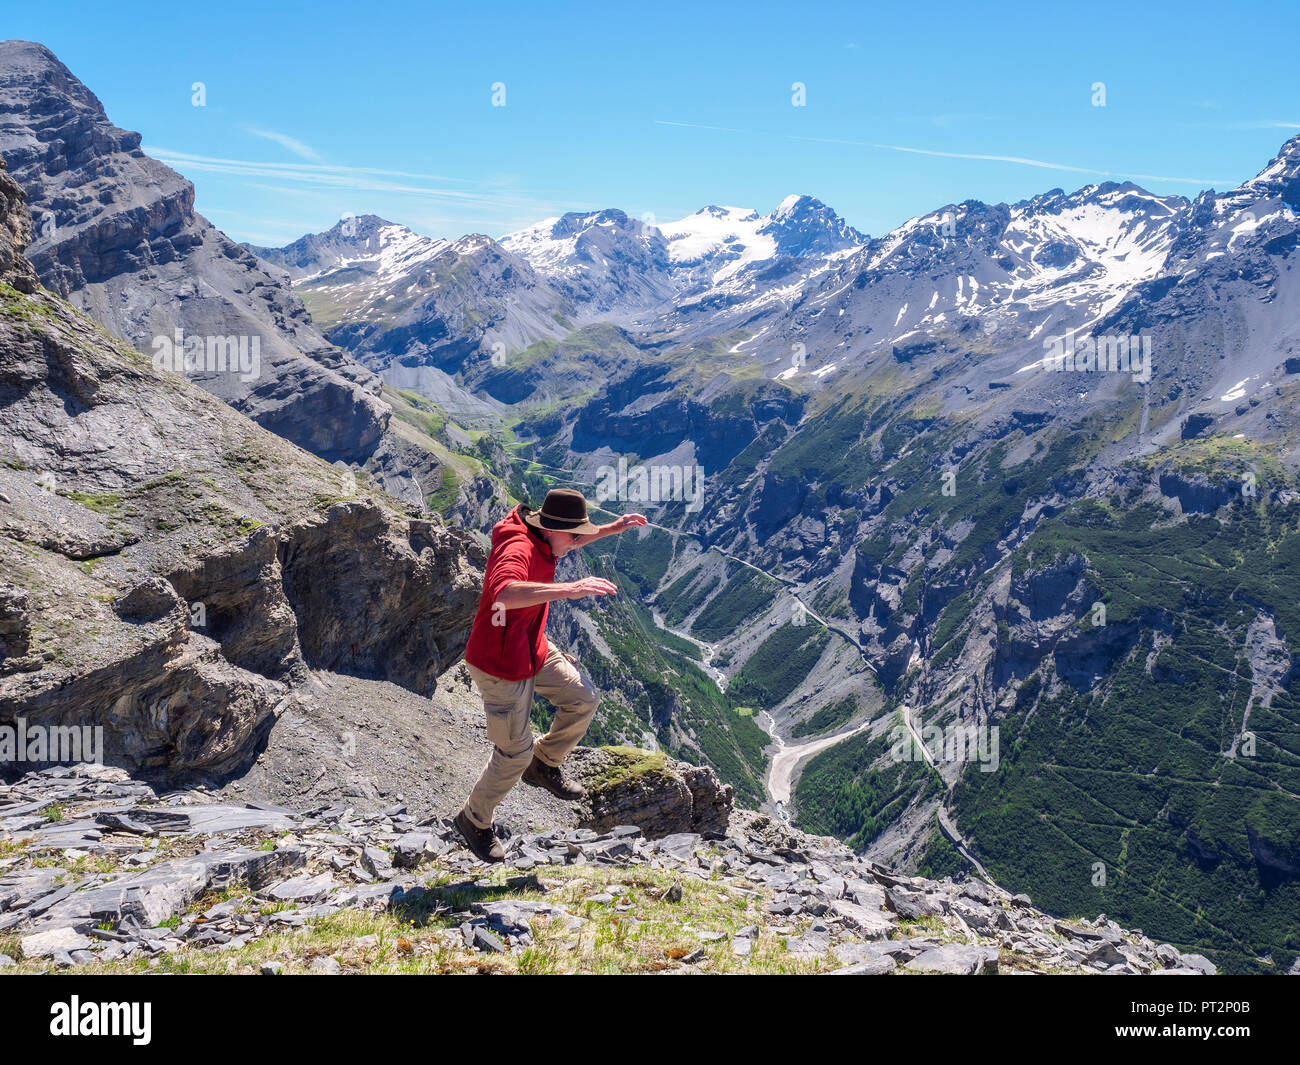 Italy, Lombardy, Sondrio, hiker jumping with view to Stelvio Pass and Ortler Stock Photo